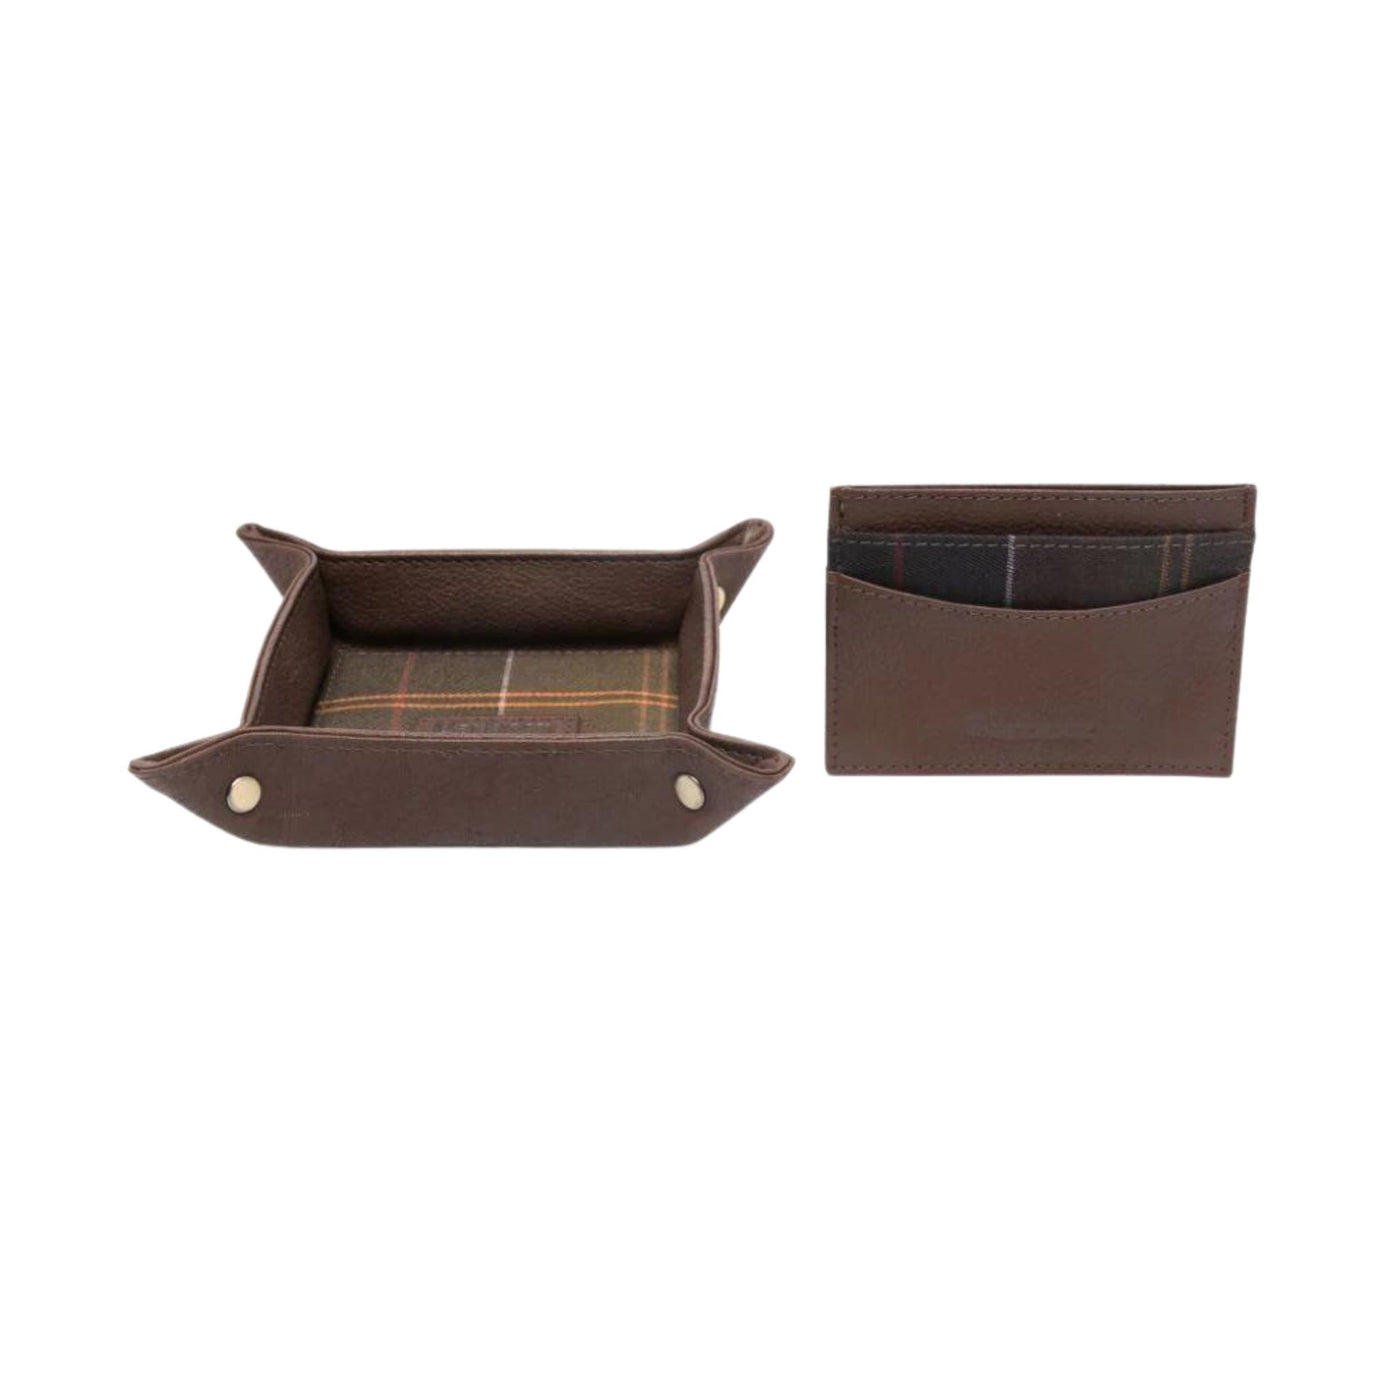 Men's pocket emptier and card holder in leather